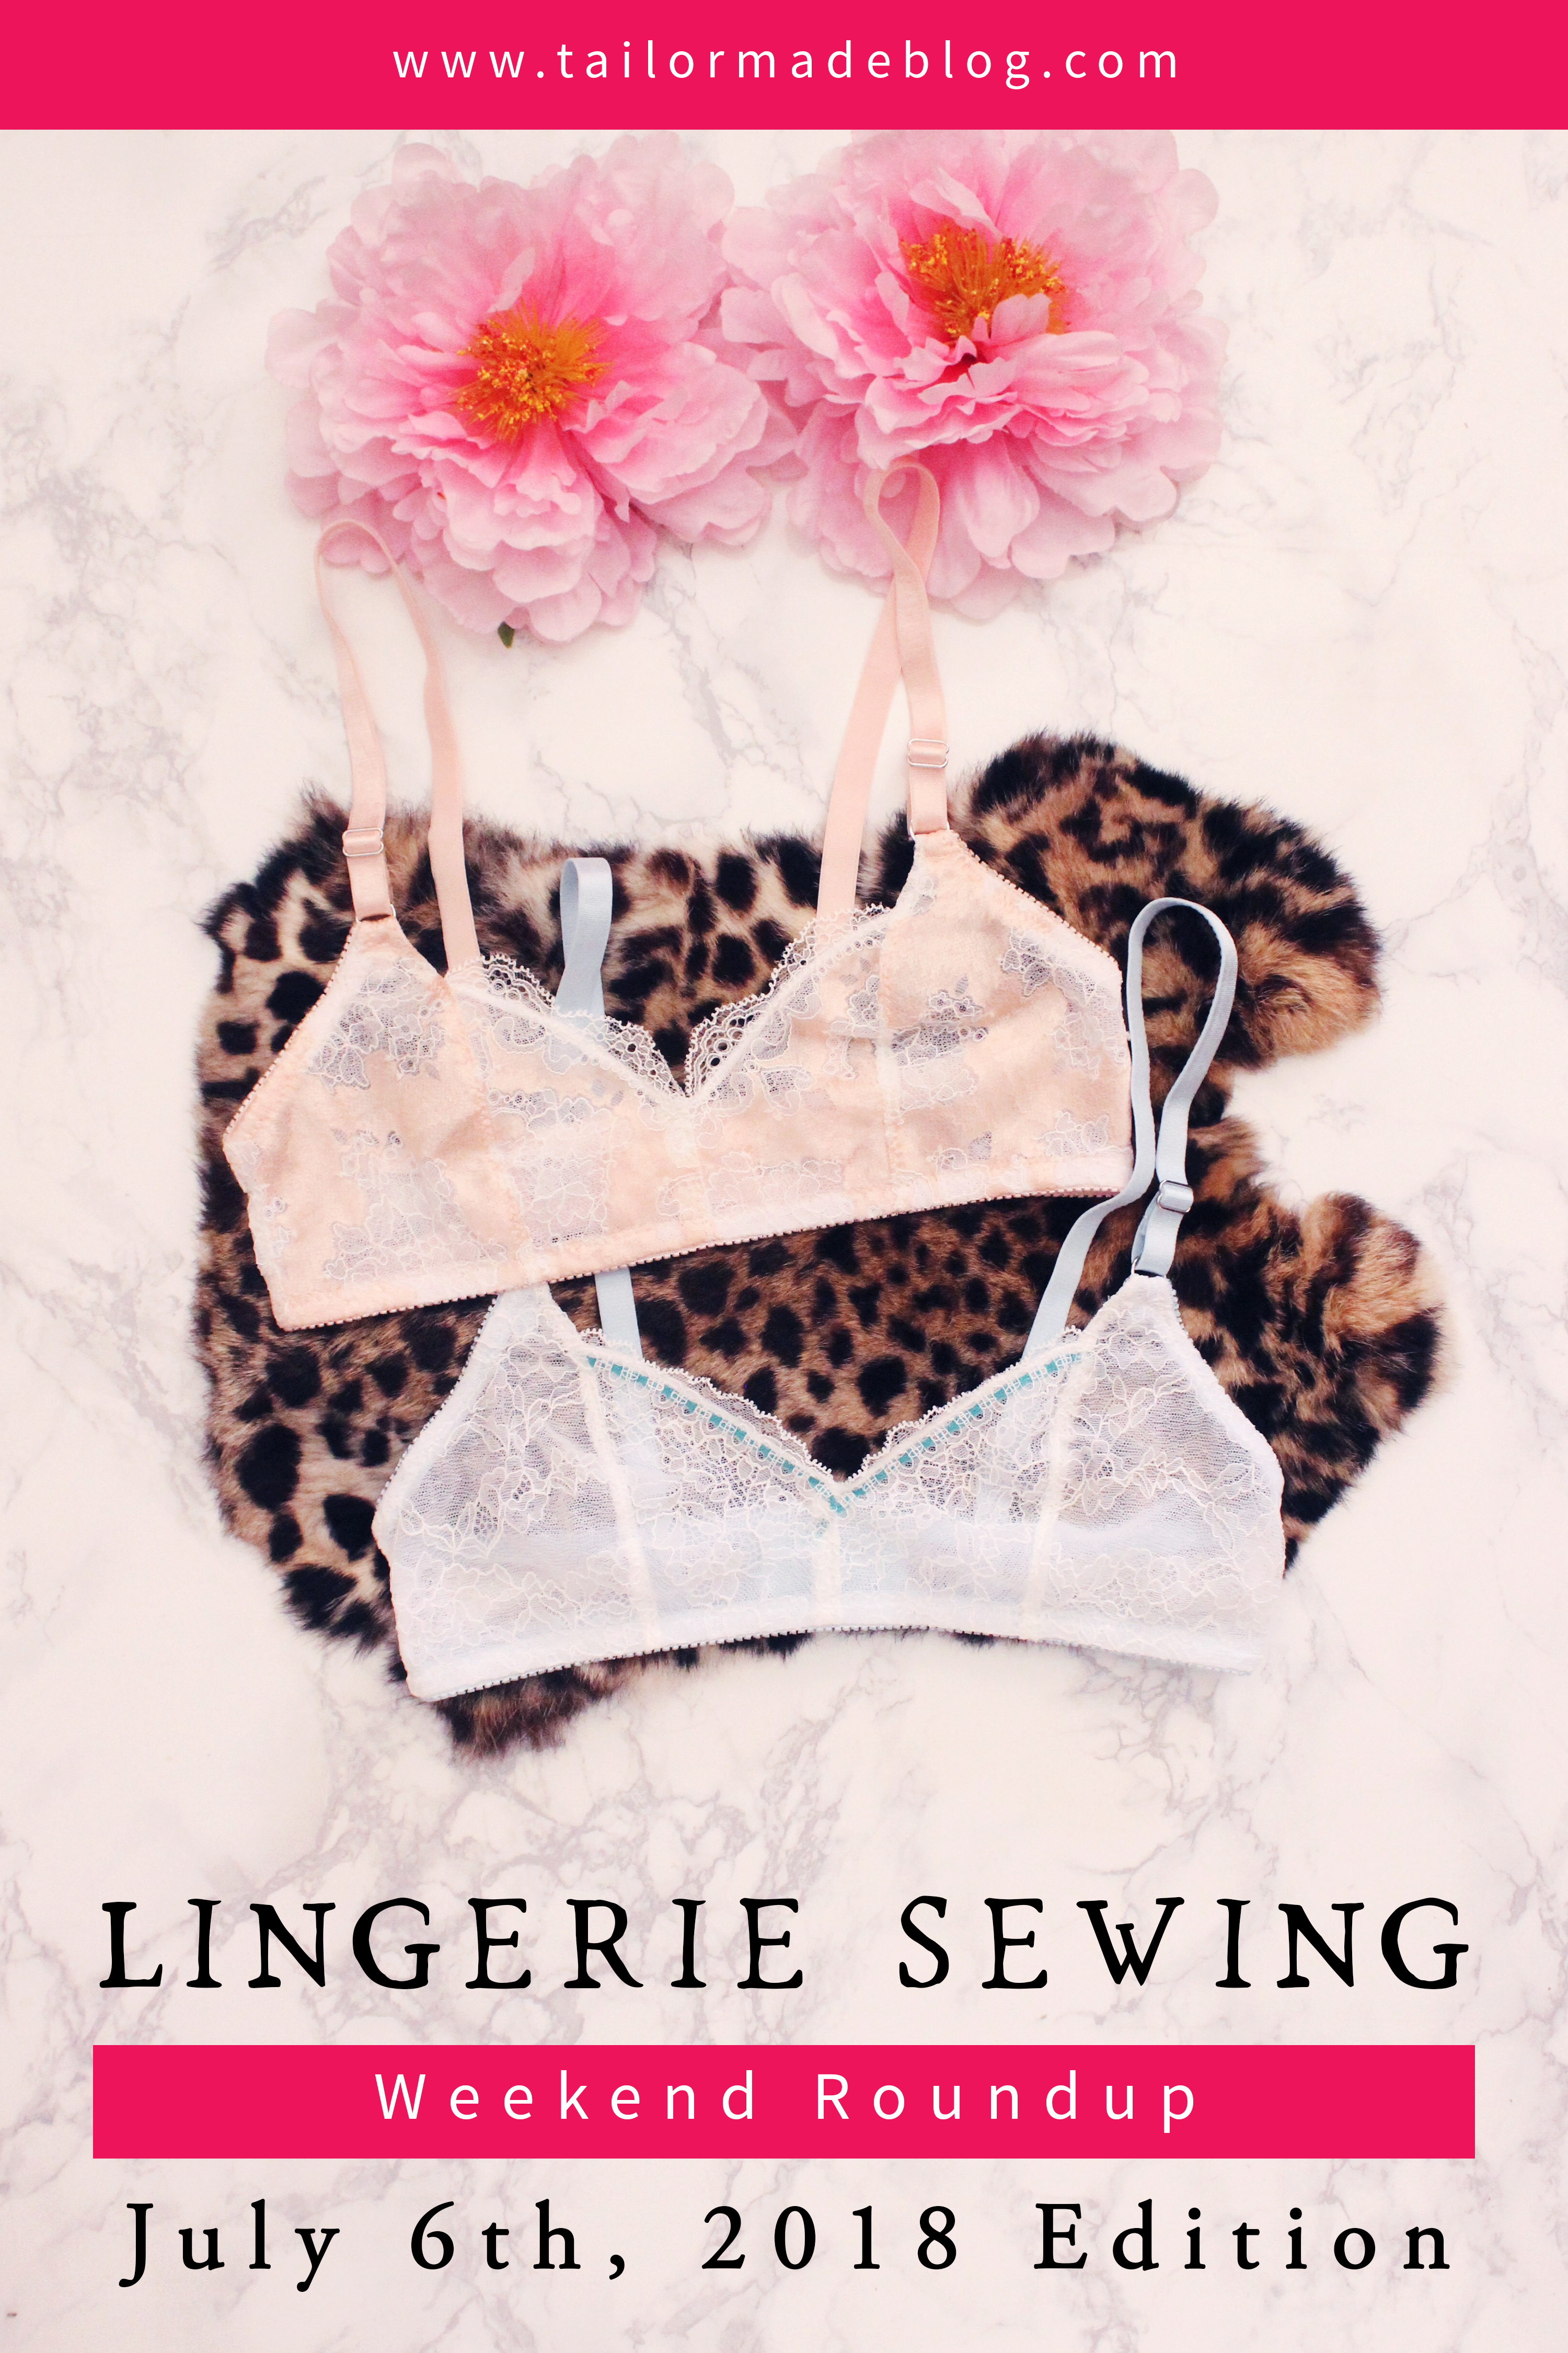 July 6th, 2018 Lingerie Sewing Weekend Roundup